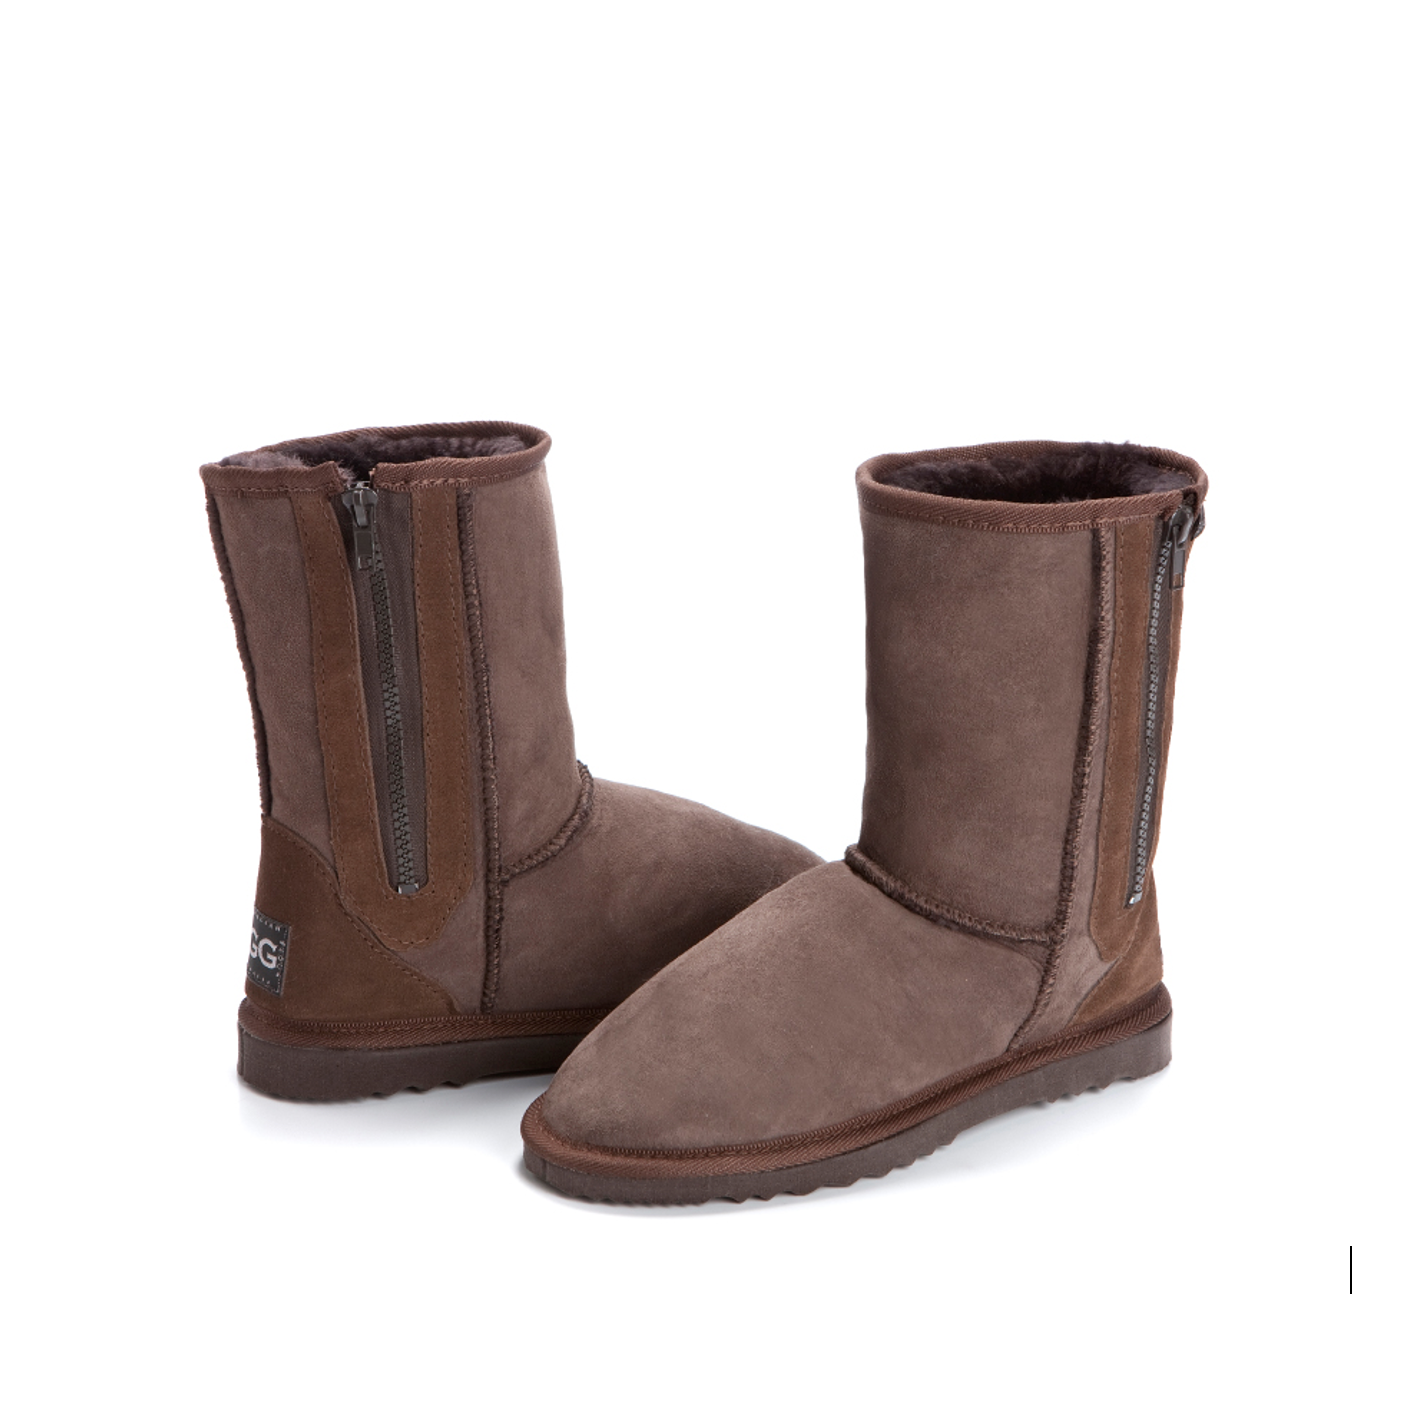 Kid's Breezer Ugg Boots, with a zip in Chocolate